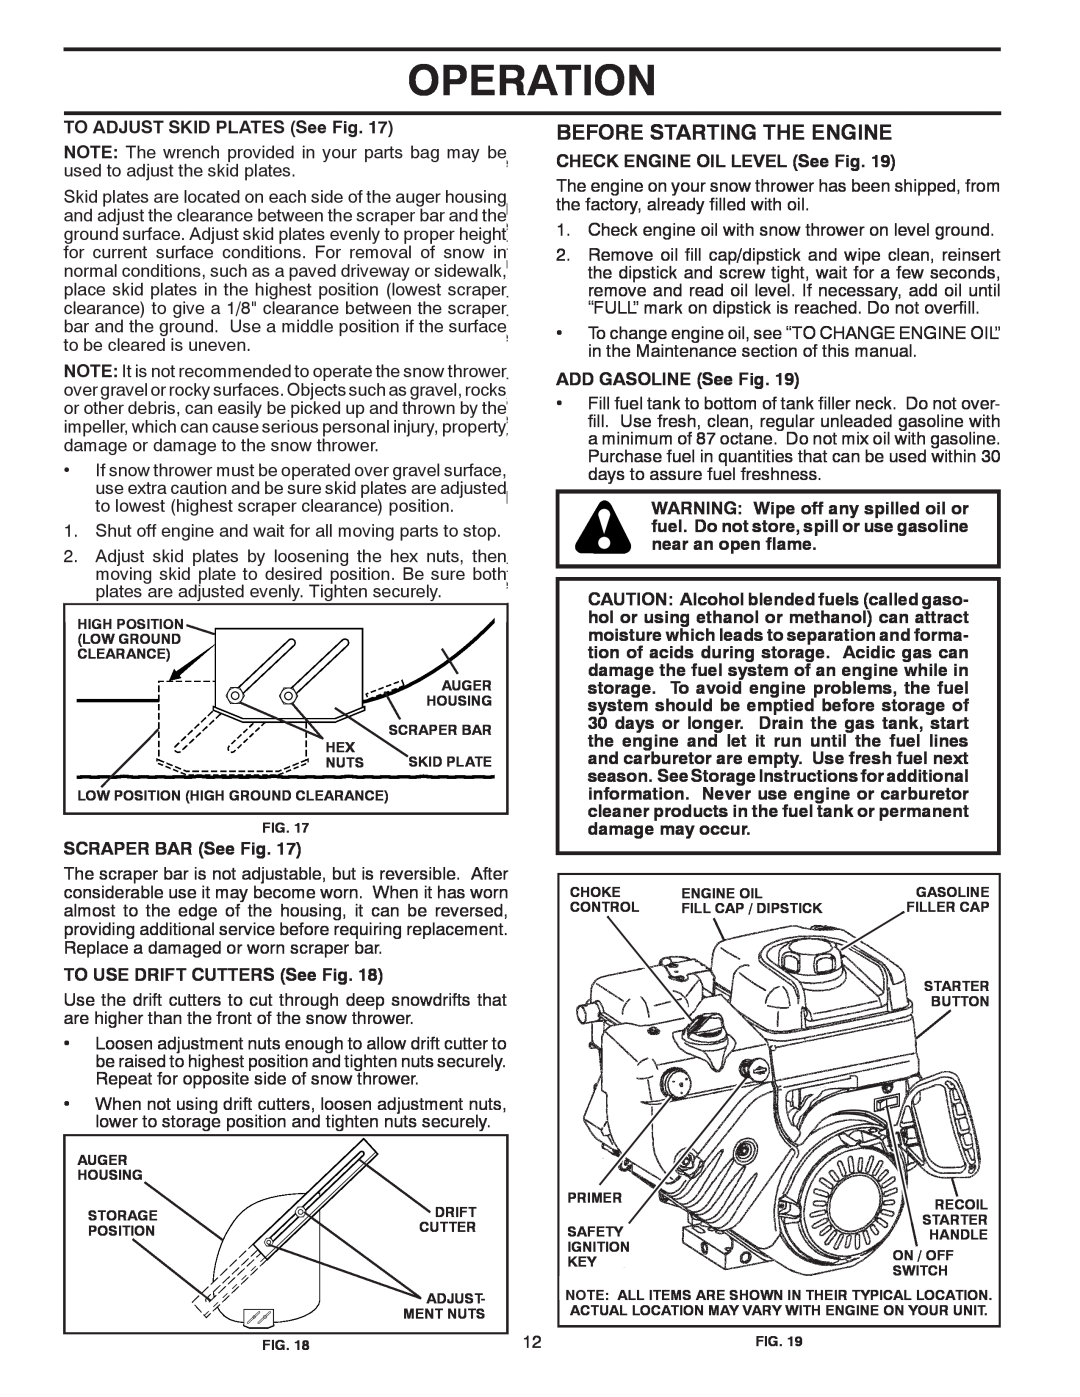 Poulan PP1150E30 Before Starting The Engine, Operation, TO ADJUST SKID PLATES See Fig, CHECK ENGINE OIL LEVEL See Fig 